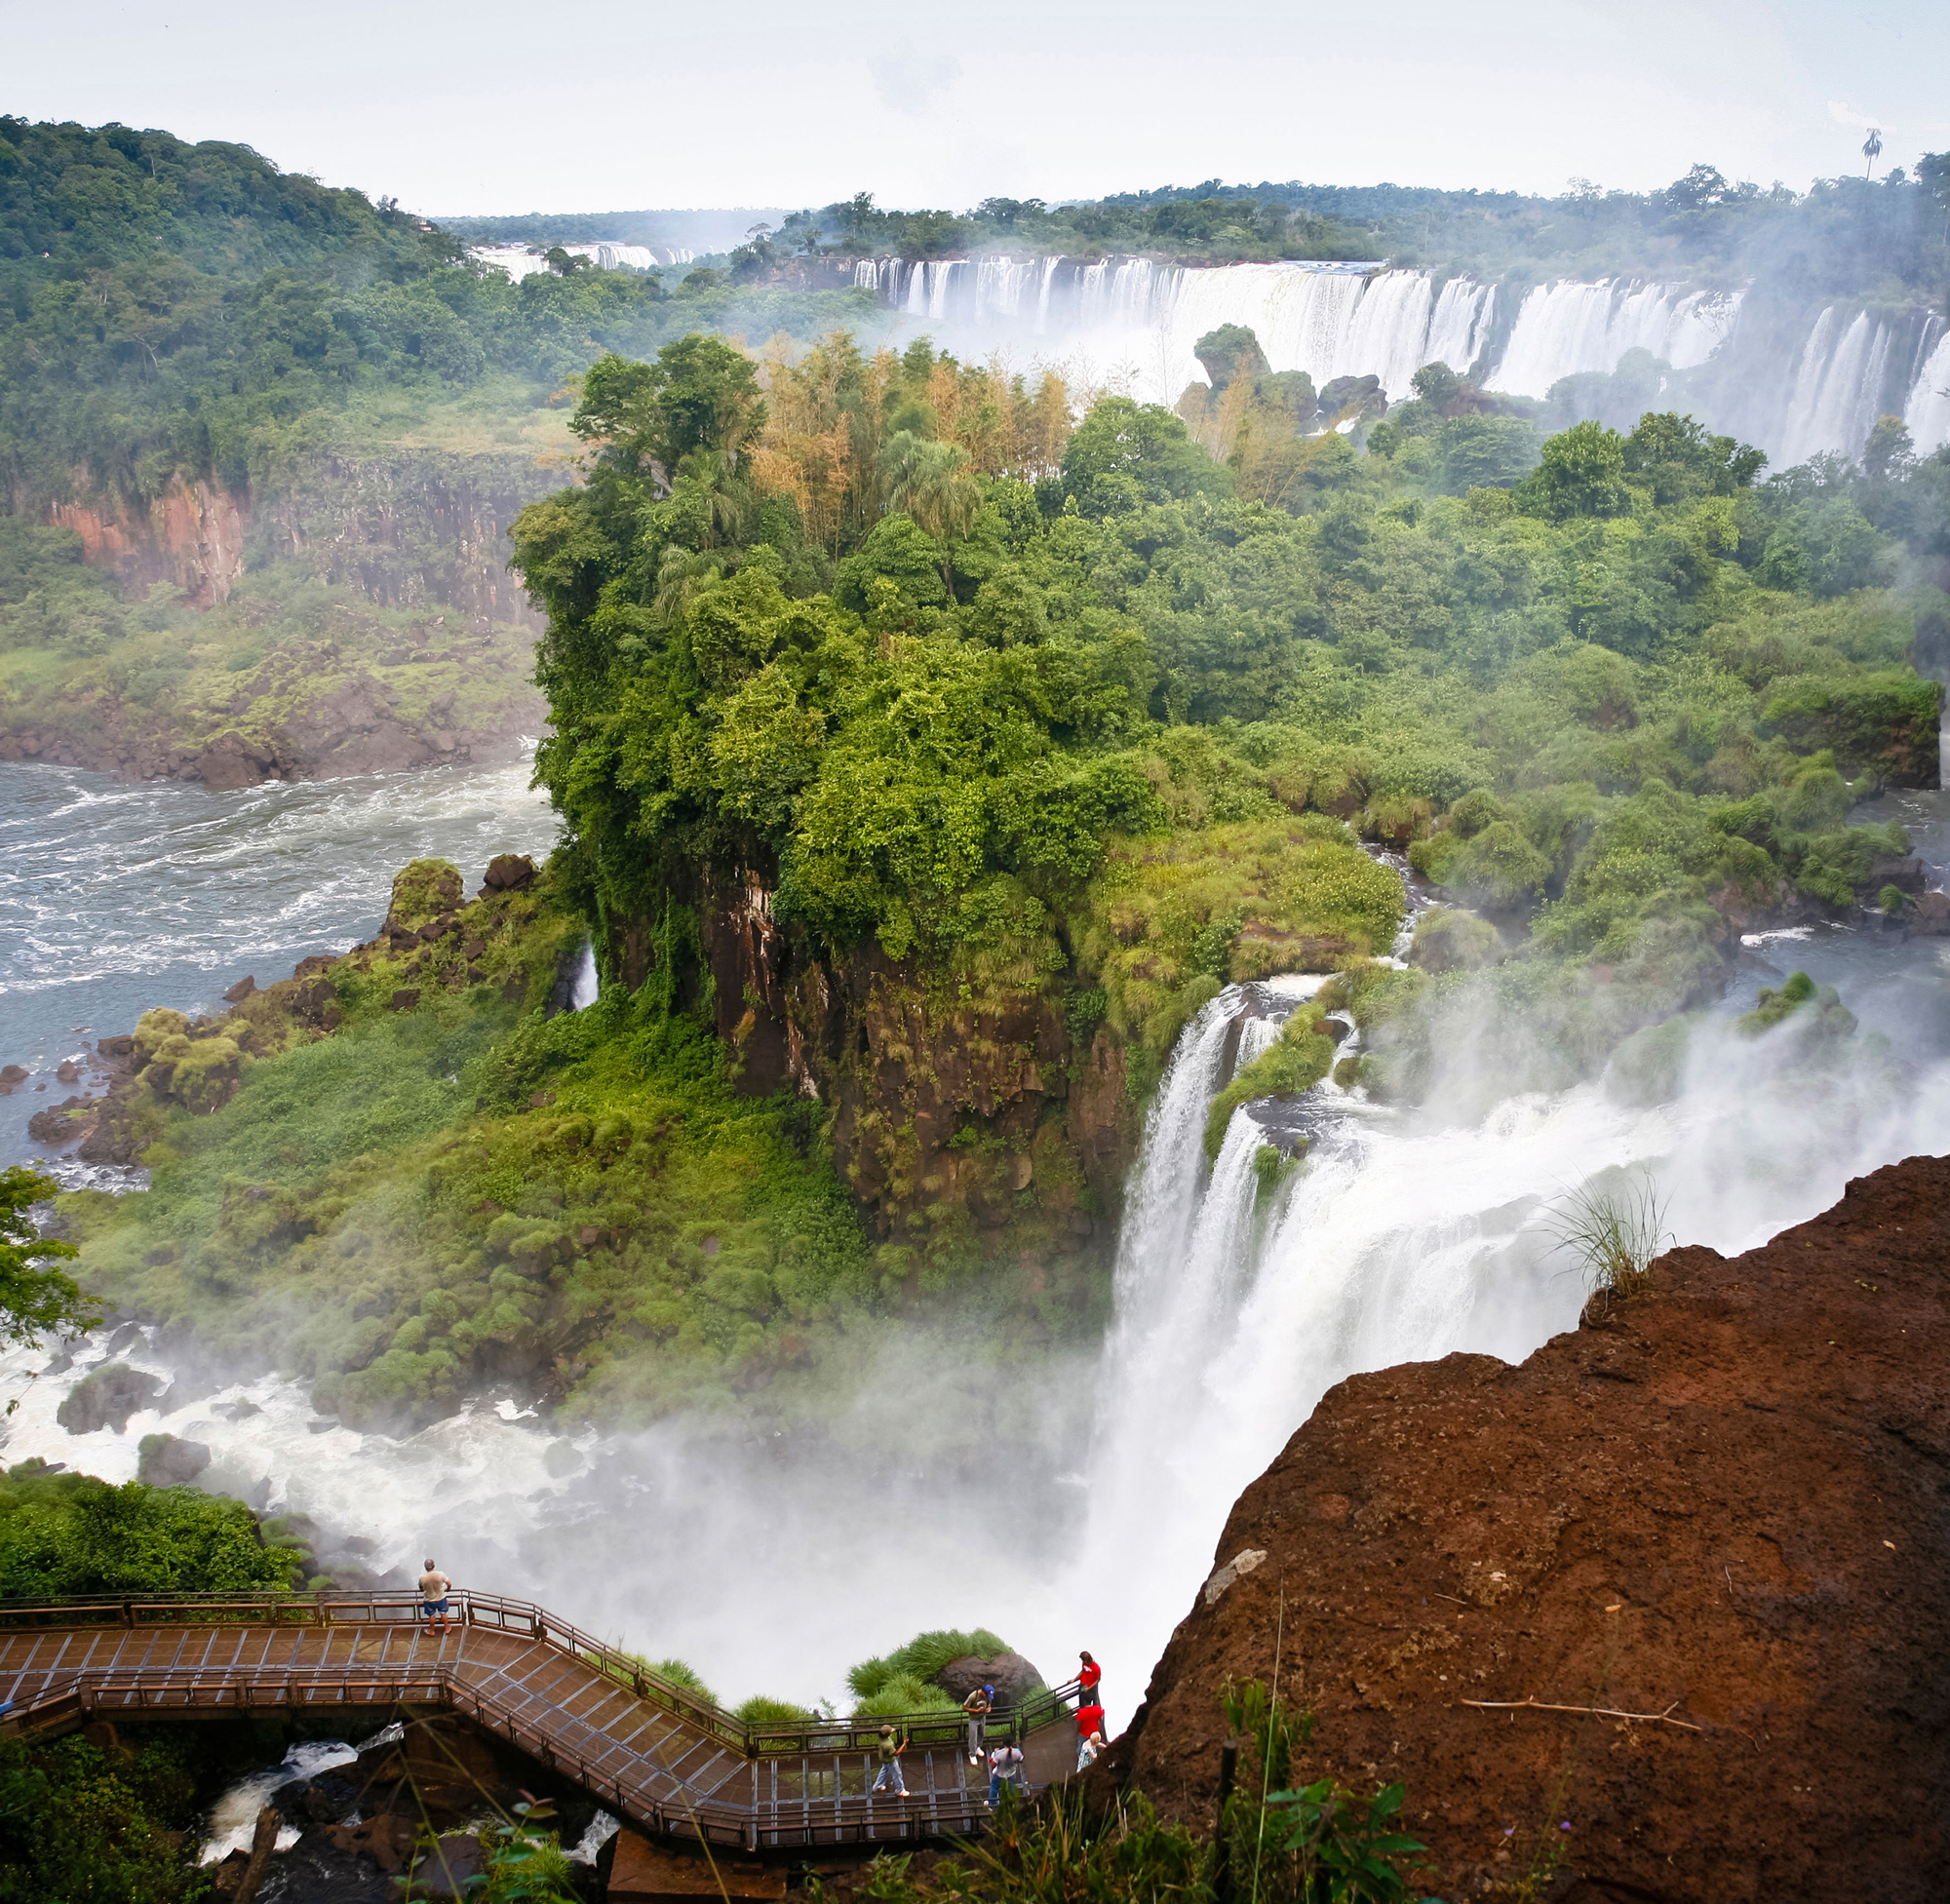 View of Iguazu Falls, with green canopy of trees